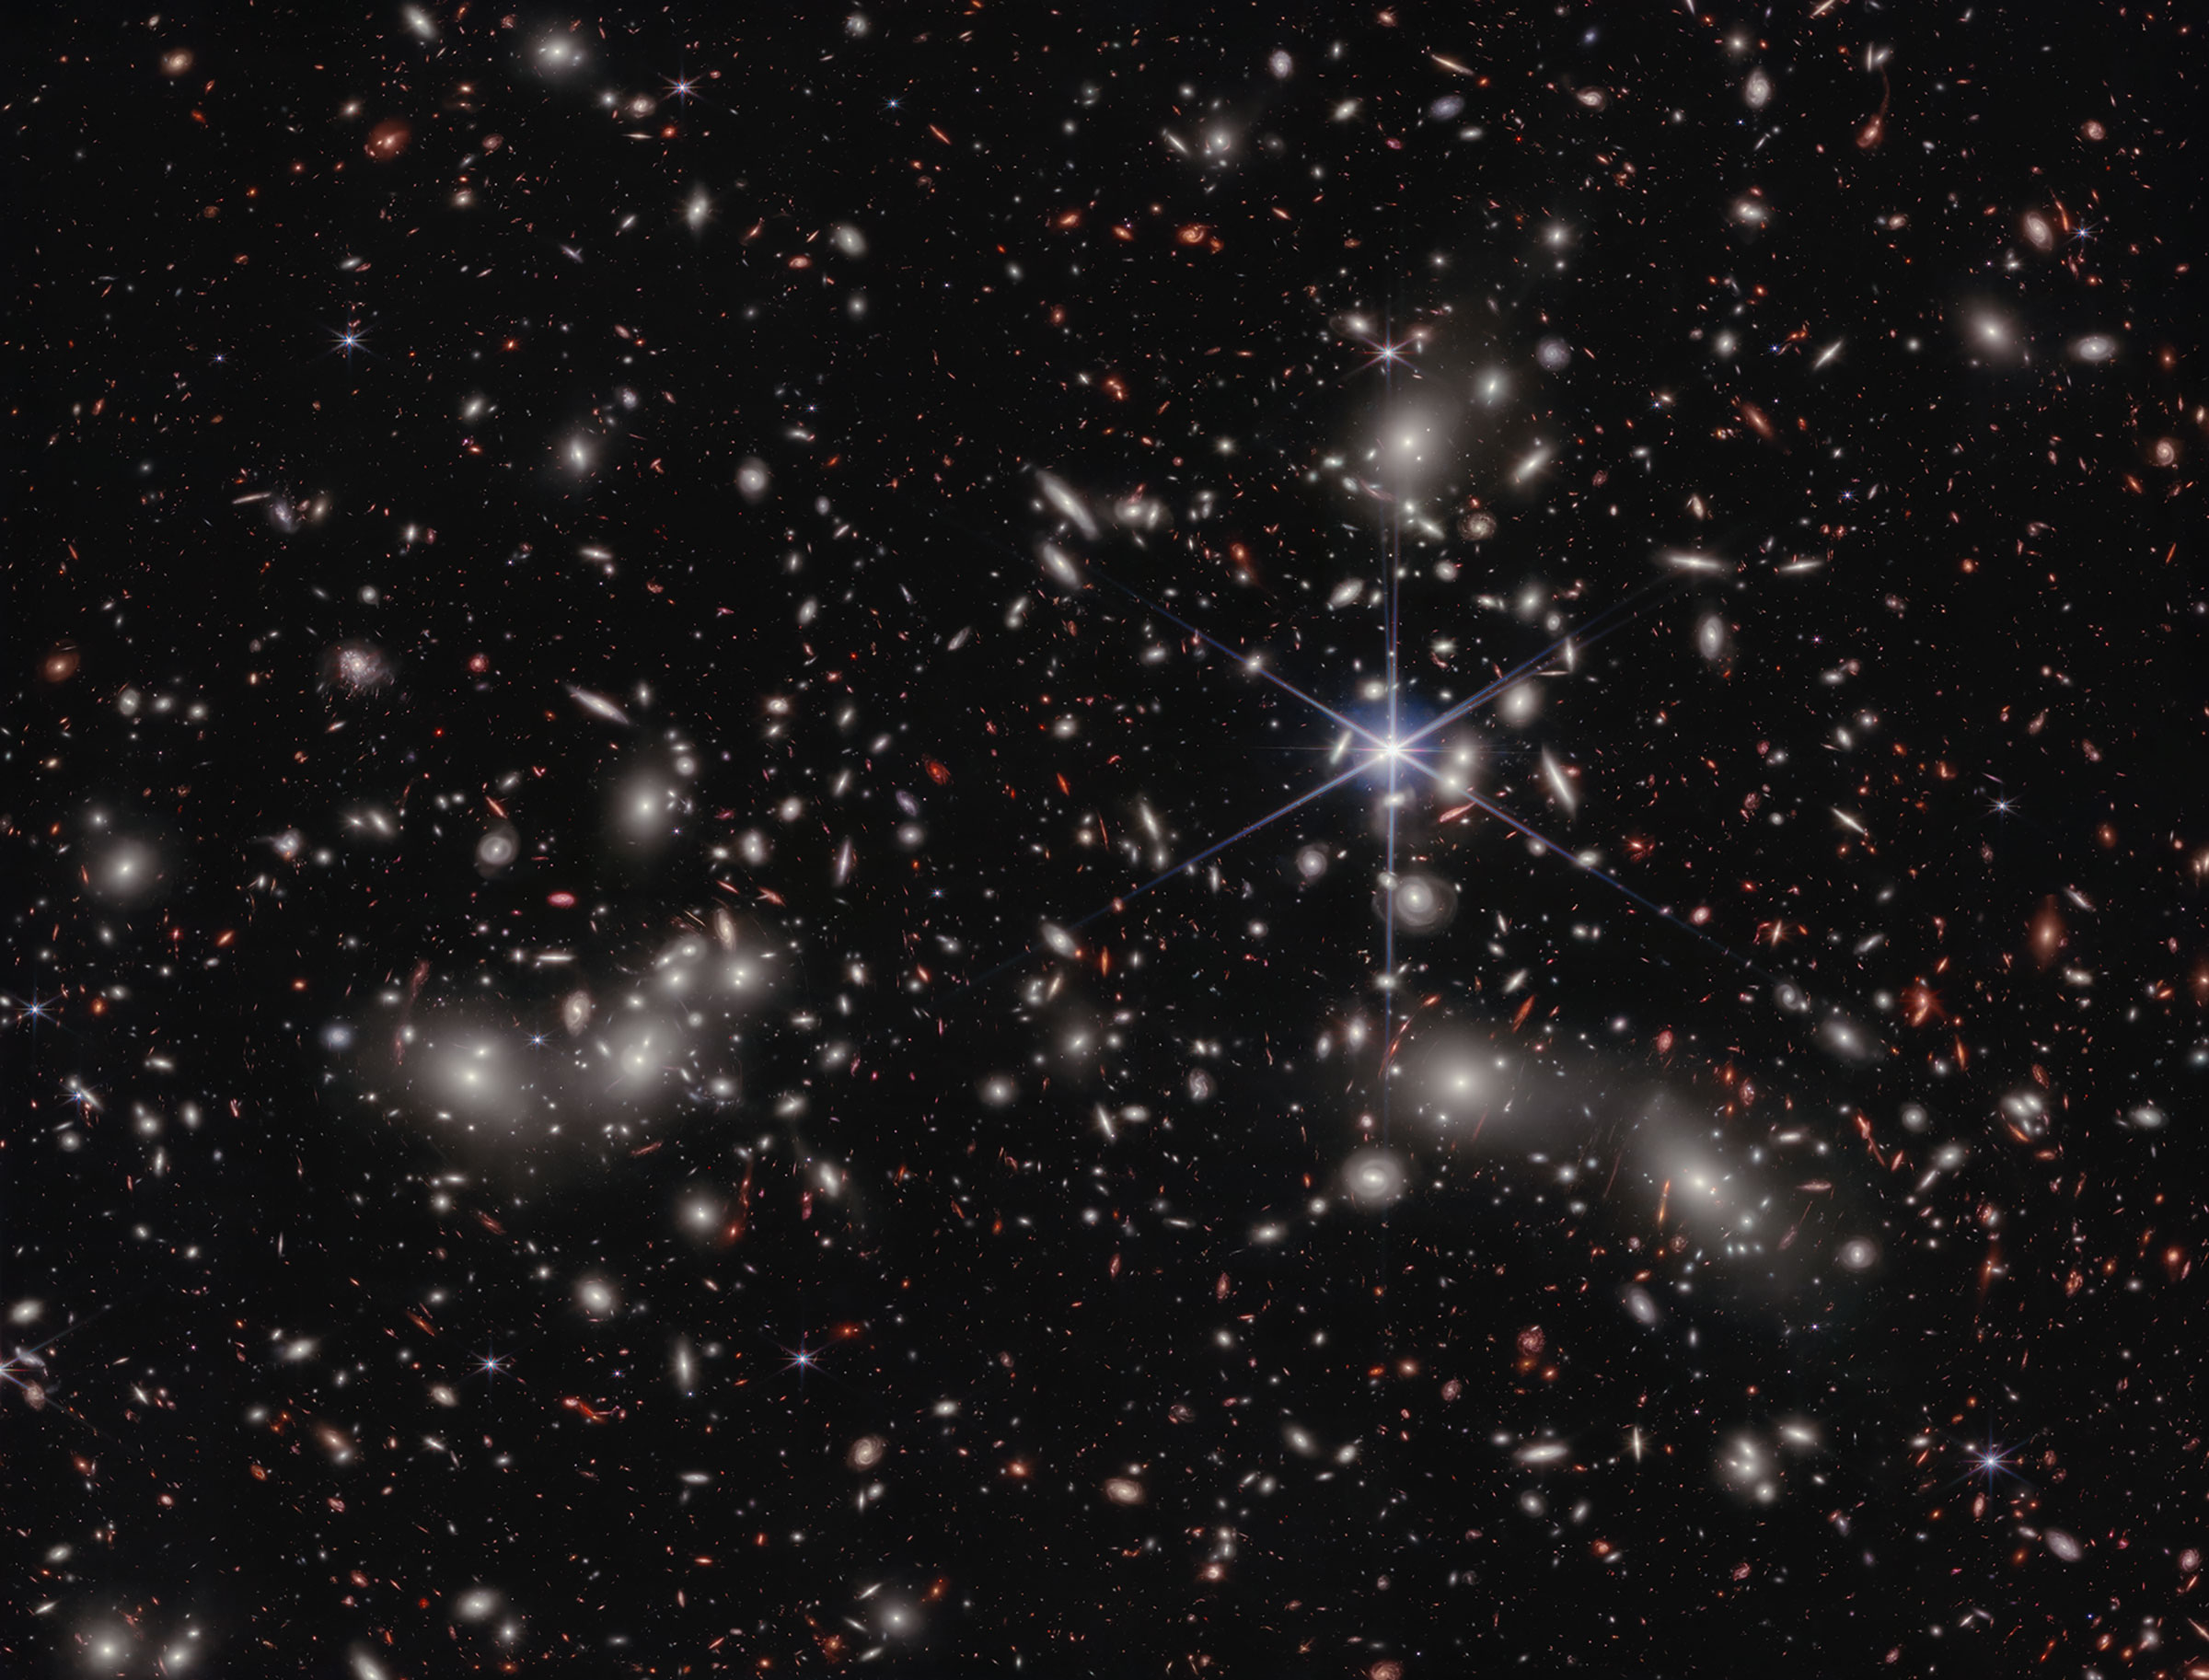 A crowded galaxy field on a black background, with one large star dominating the image just right of center. Three areas are concentrated with larger white hazy blobs on the left, lower right, and upper right above the single star. Scattered between these areas are many smaller sources of light; some also have a hazy white glow, while many other are red or orange. Even without zooming in, different galaxy shapes are detectable, like spirals, ovals, and arcs.